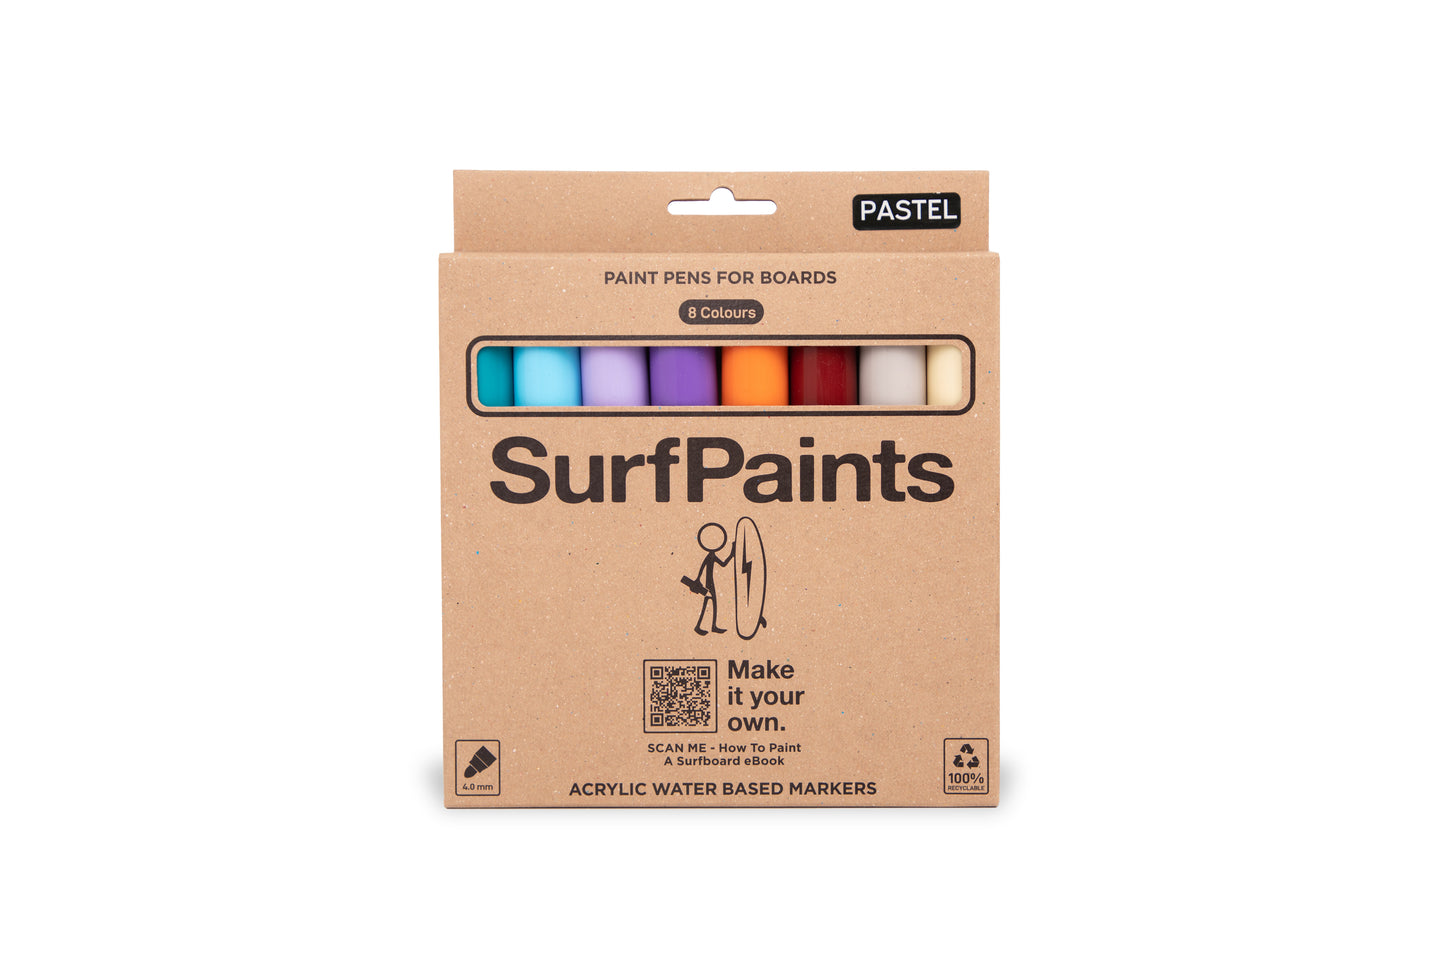 All-in-One Bamboo Surfboard Art Kit: DIY Surface Prep, Paint & Customise - Includes Primary & Pastel Acrylic Sets